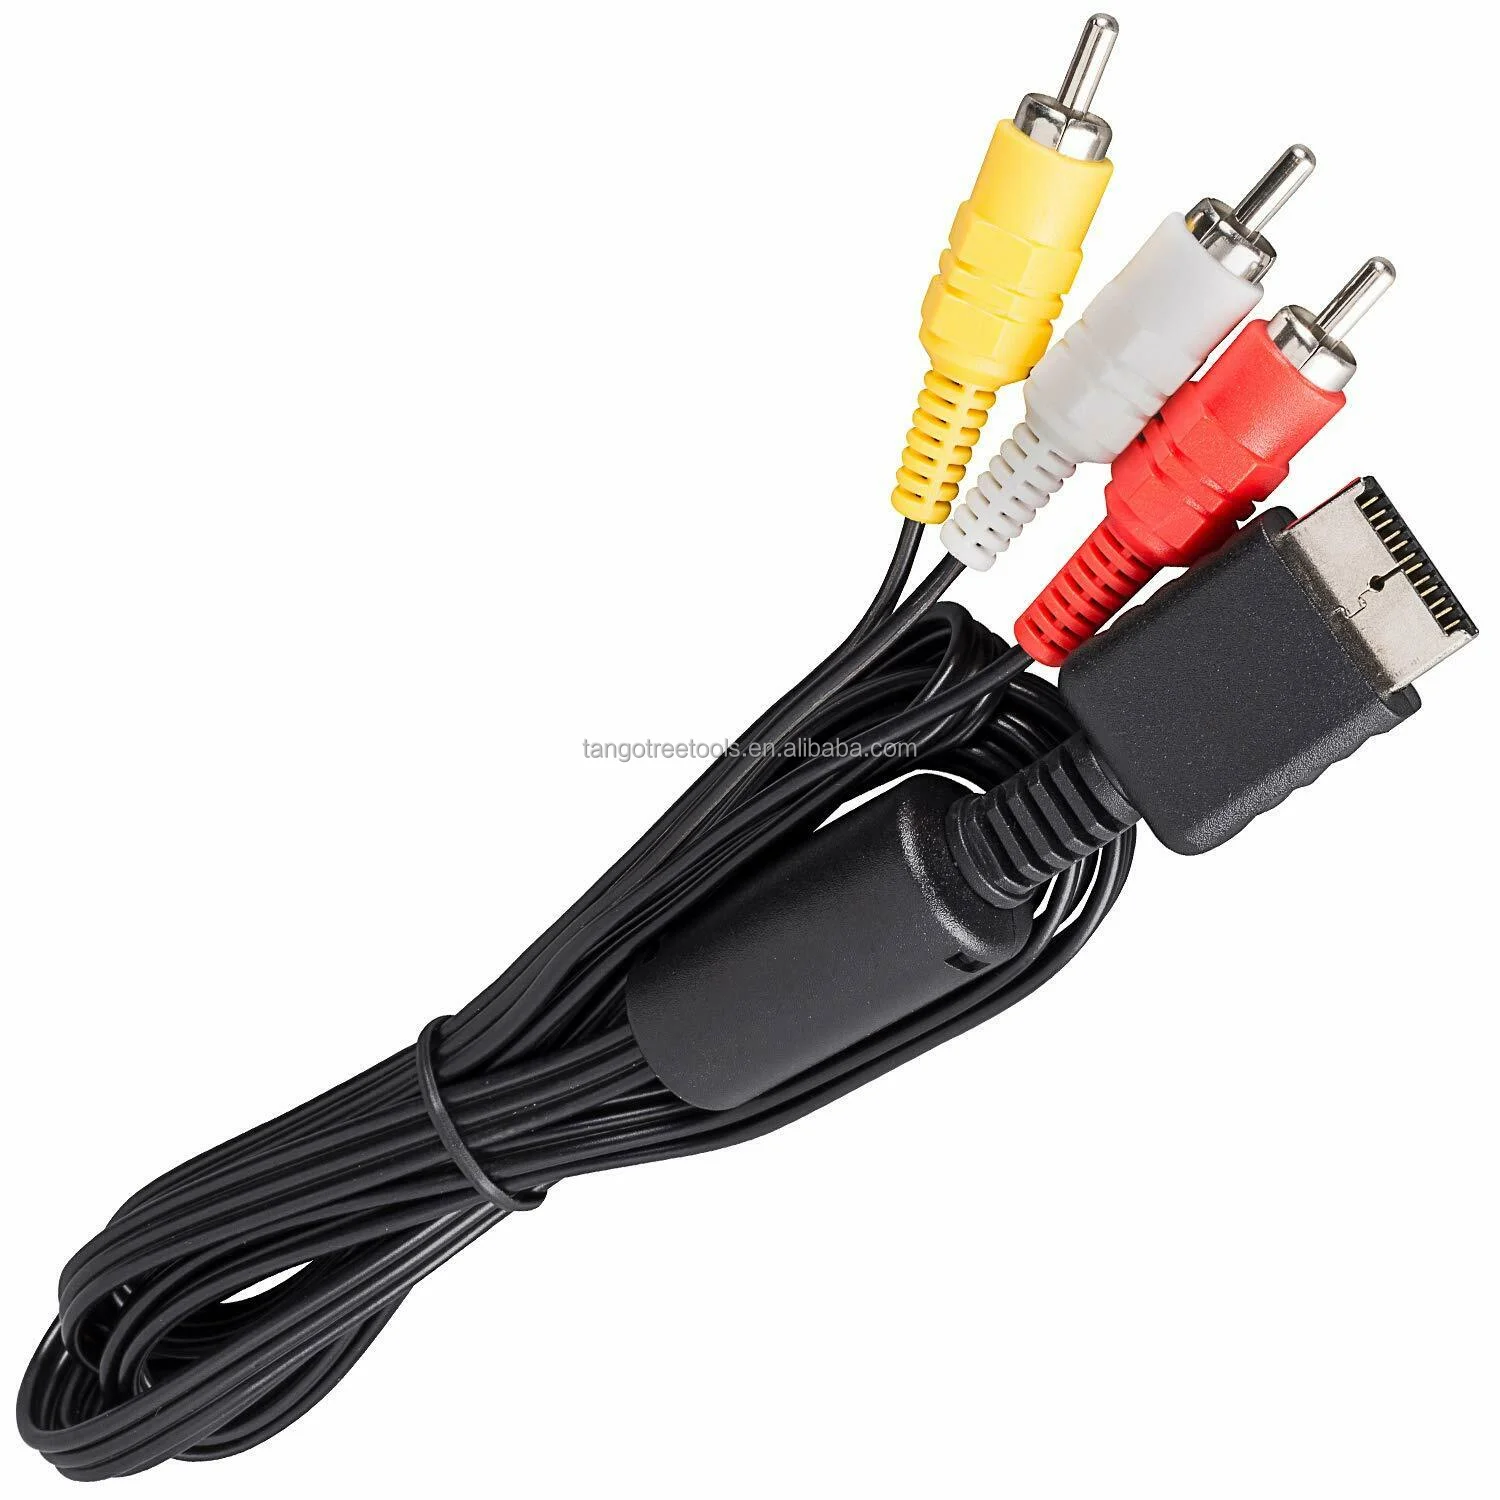 Kosciuszko Diplomati Nogle gange nogle gange Wholesale 1.8M 3 rca cables AV cable for playstation 2 for Sony PS2 From  m.alibaba.com